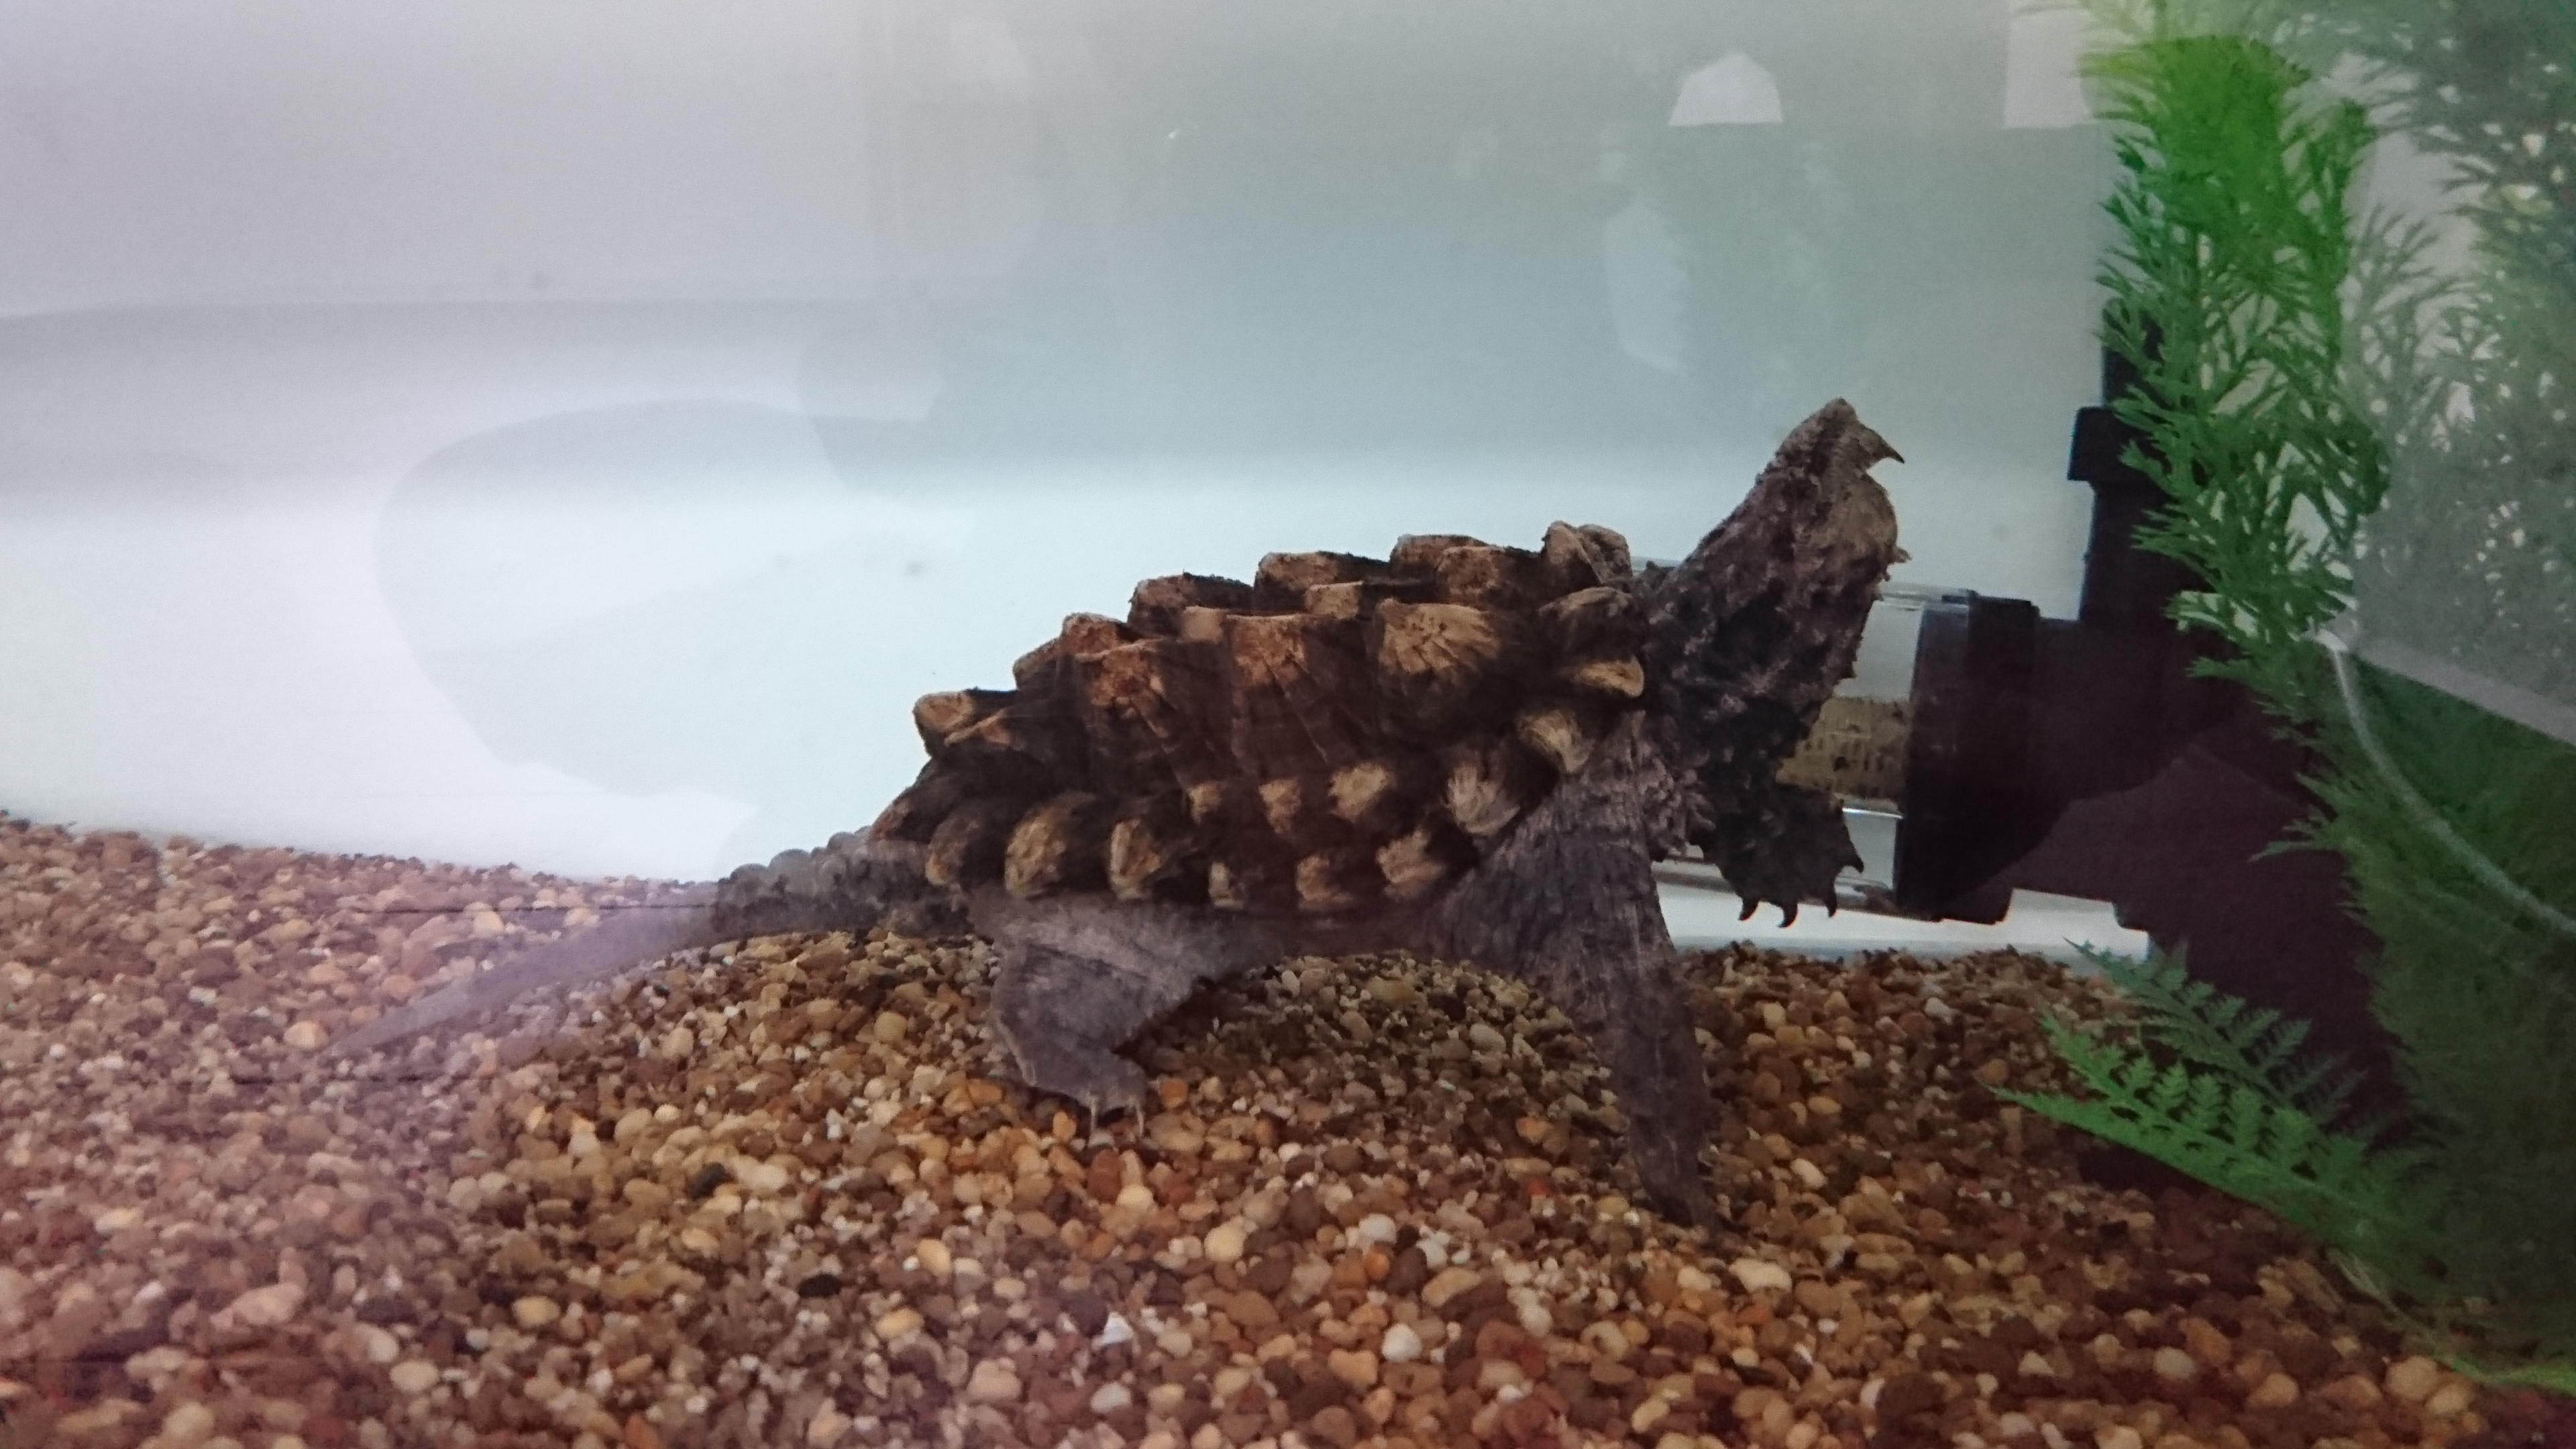 Alligator snapping turtle shell HELP! | Page 6 | MonsterFishKeepers.com